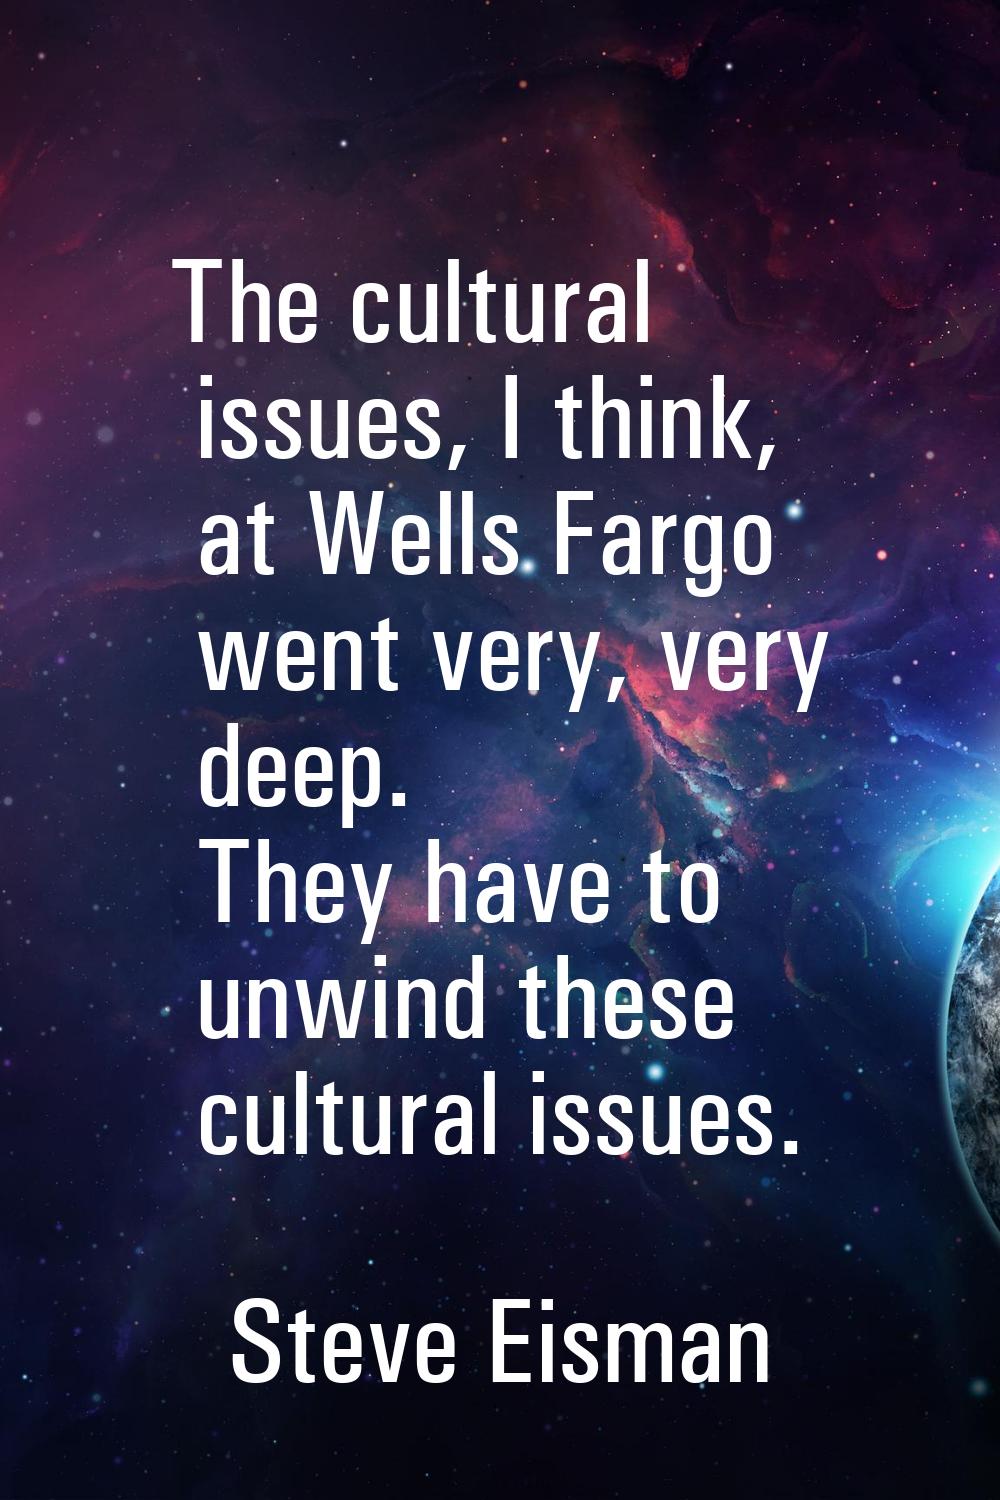 The cultural issues, I think, at Wells Fargo went very, very deep. They have to unwind these cultur